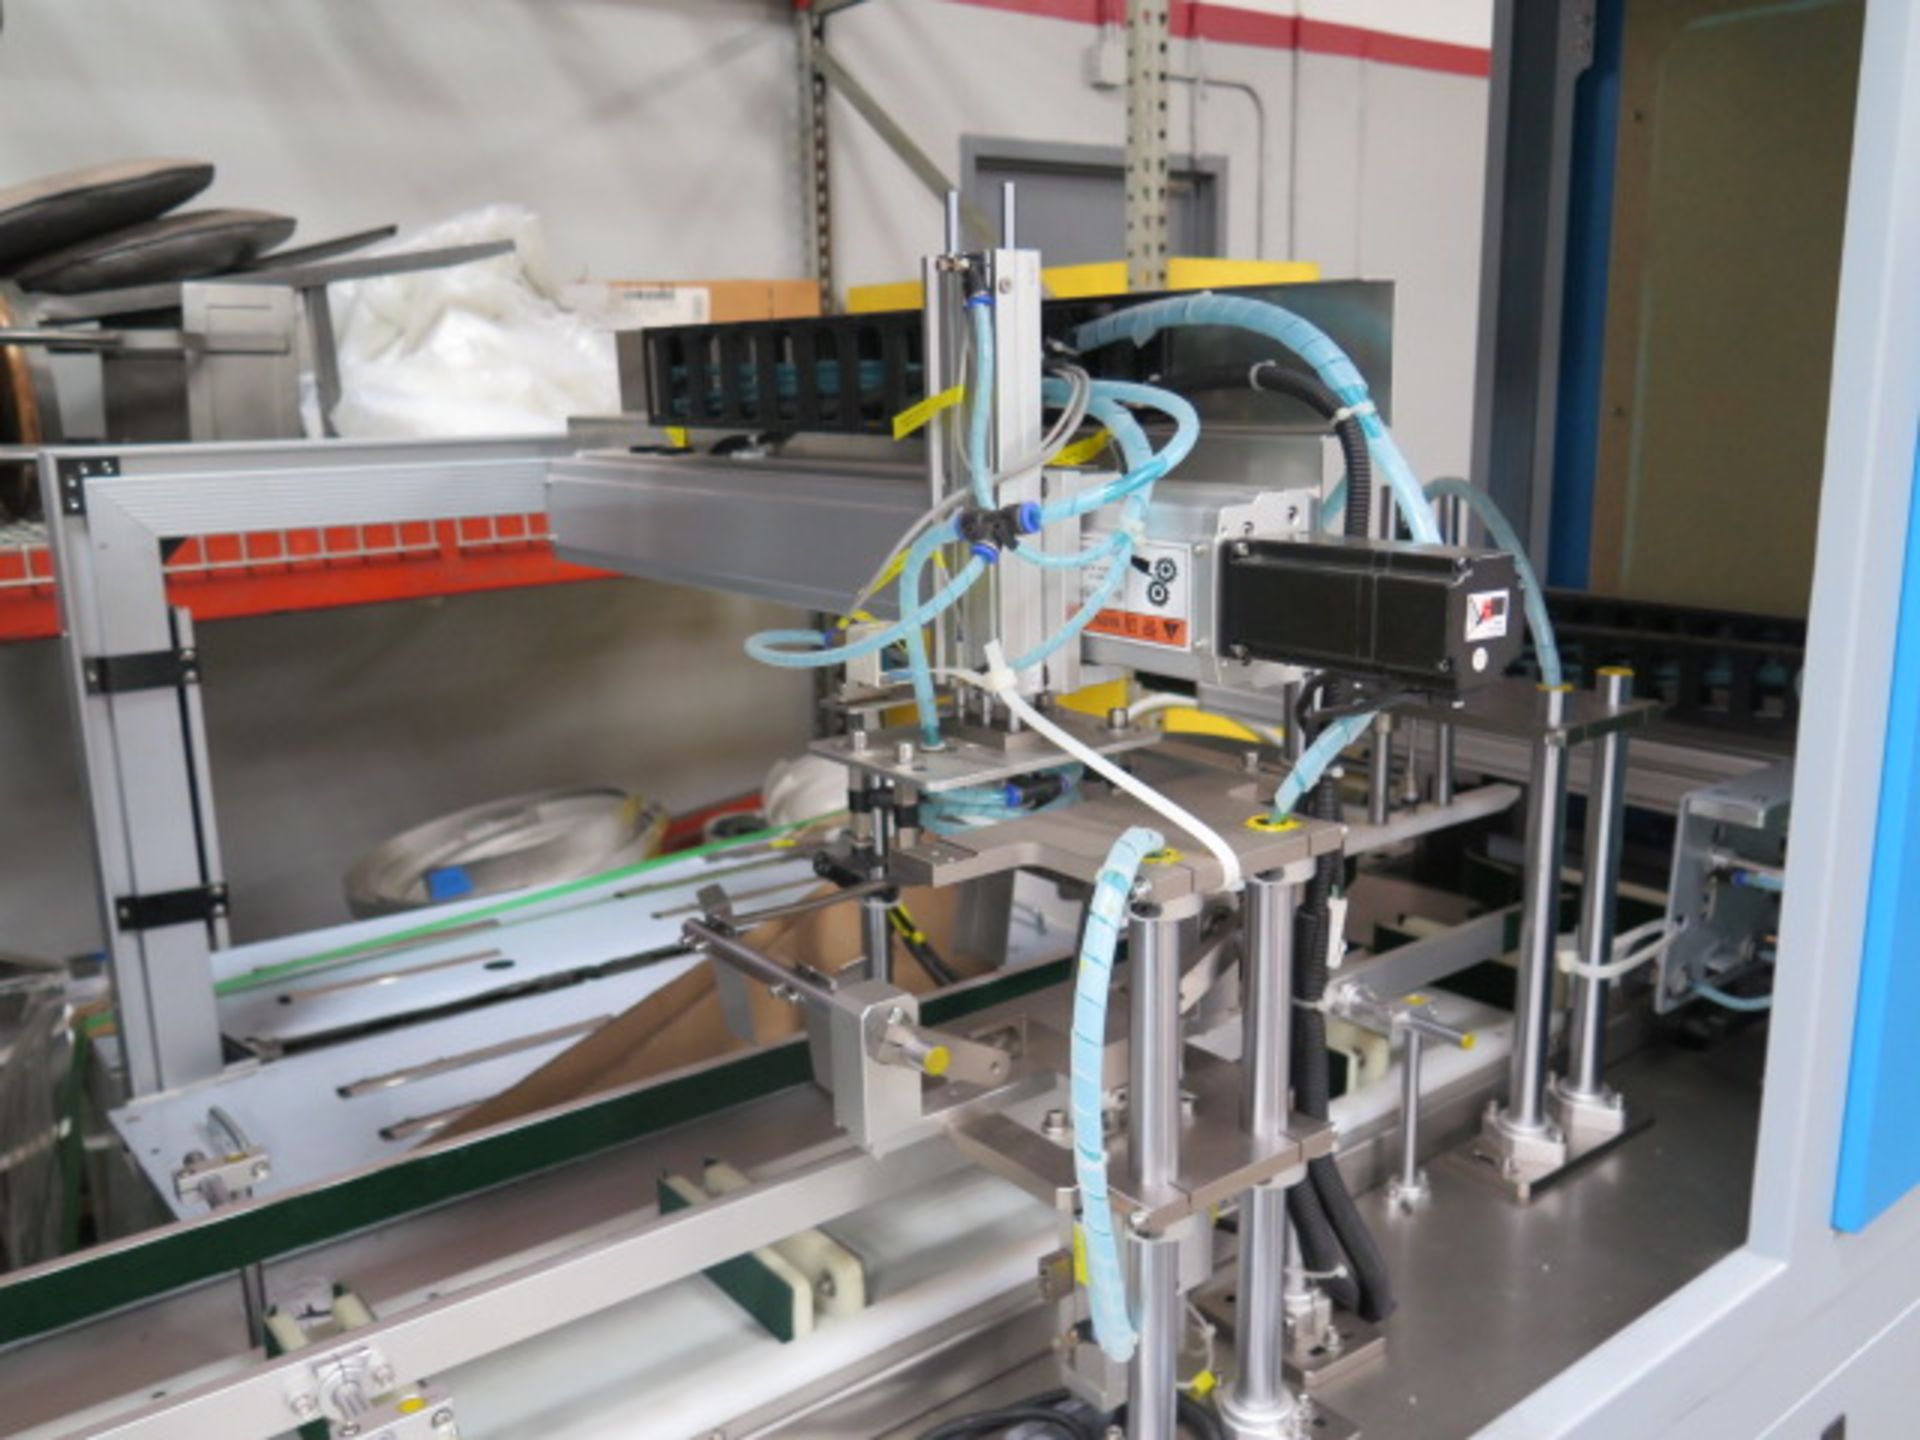 2021 (NEW) Rongyu Robotic Packaging Machine w/ HSR-BR616 6-Axis Robotic Manipulator, SOLD AS IS - Image 29 of 46